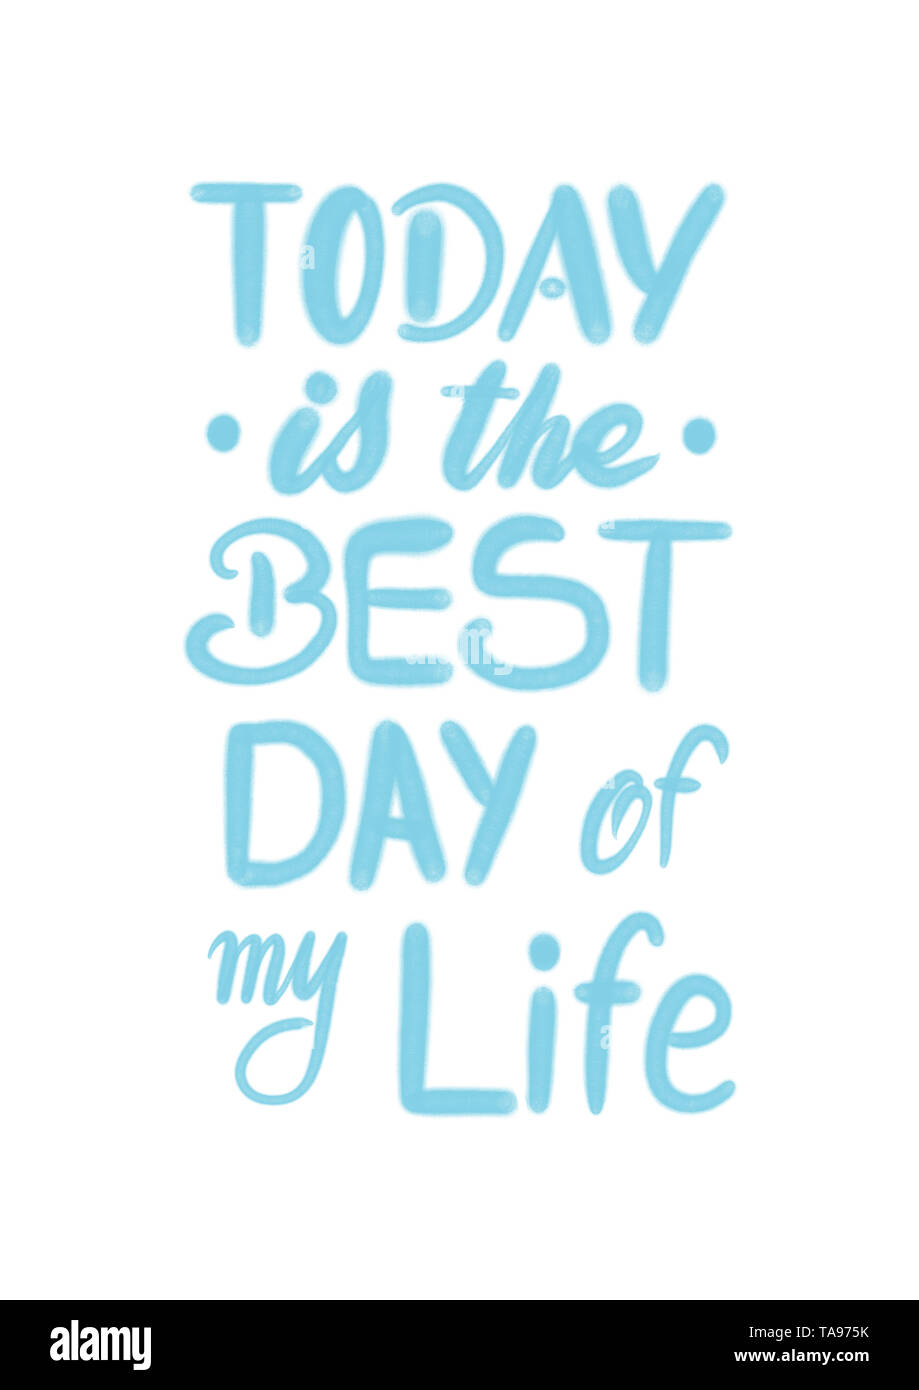 Today is the best day of my life - hand lettering design for t-shirts or prints Stock Photo